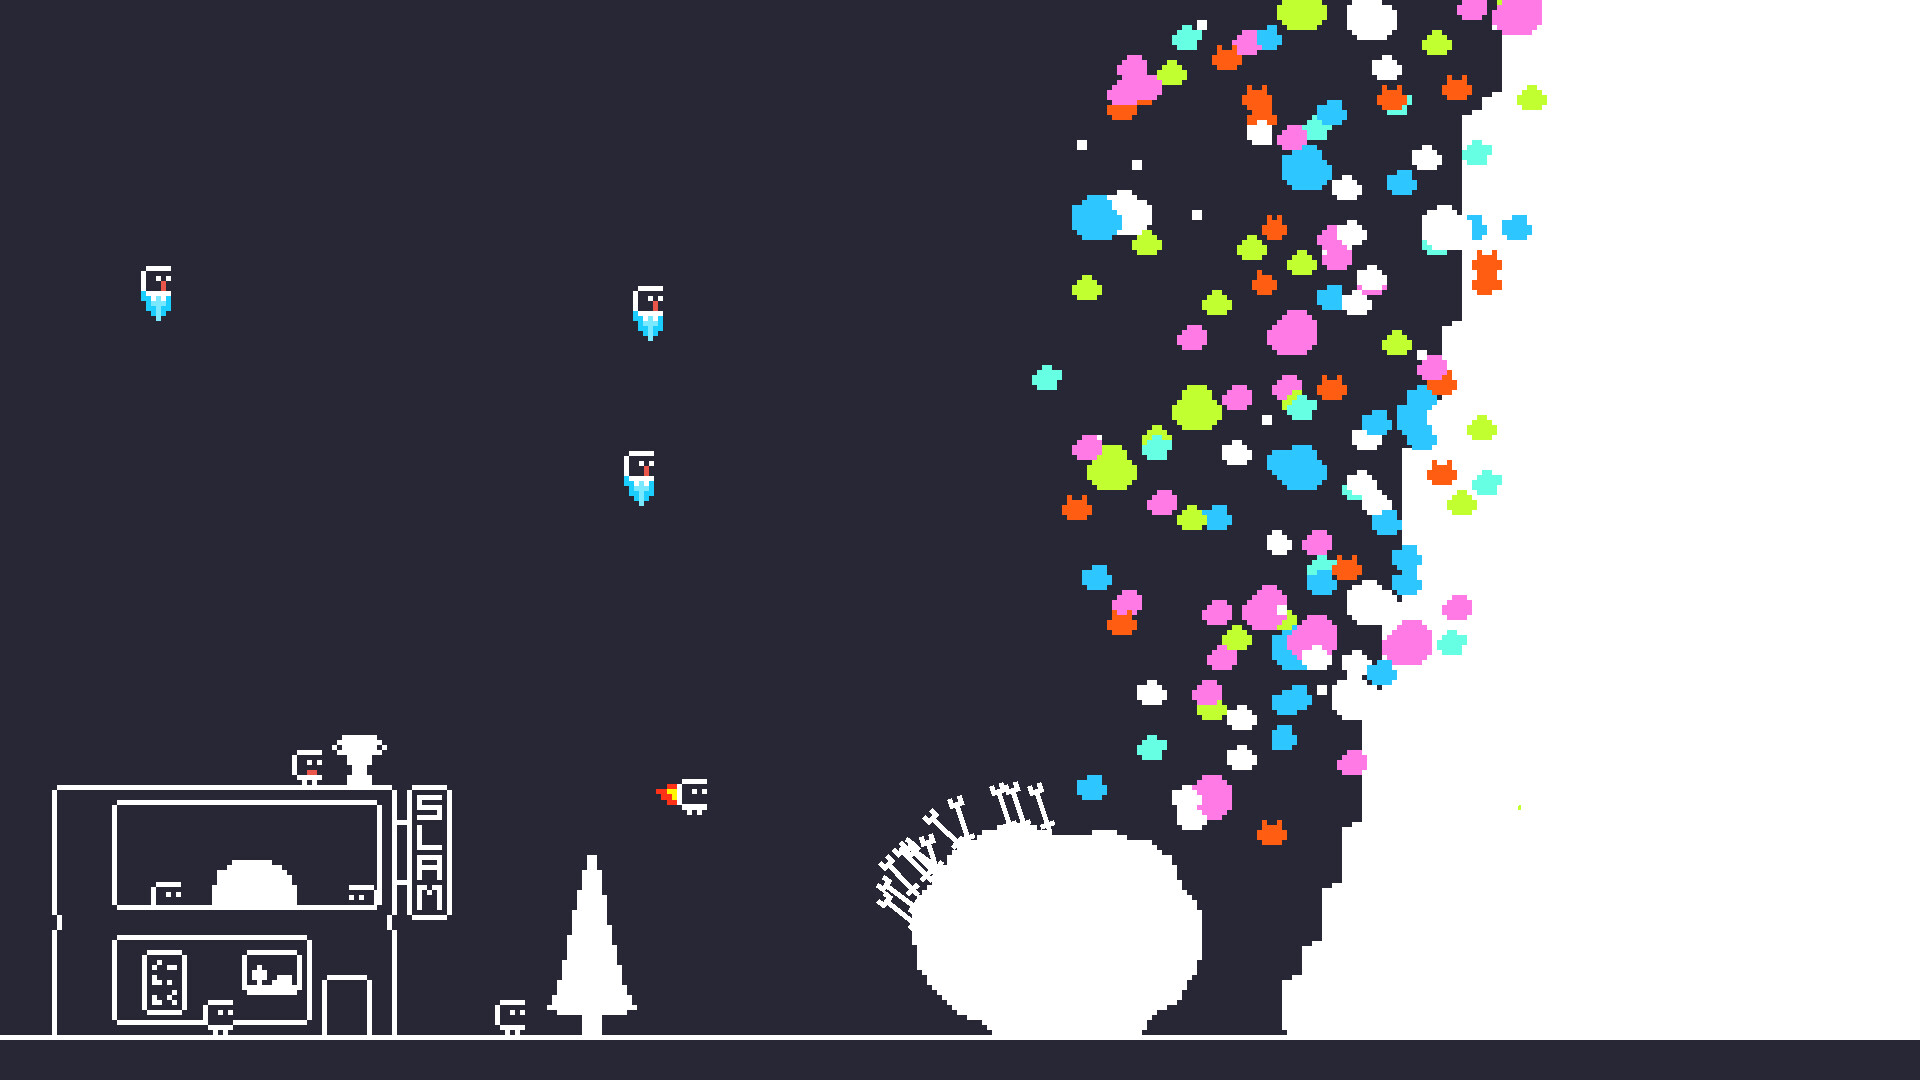 Particles flying around in a screenshot from (the) Gnorp Apolgue